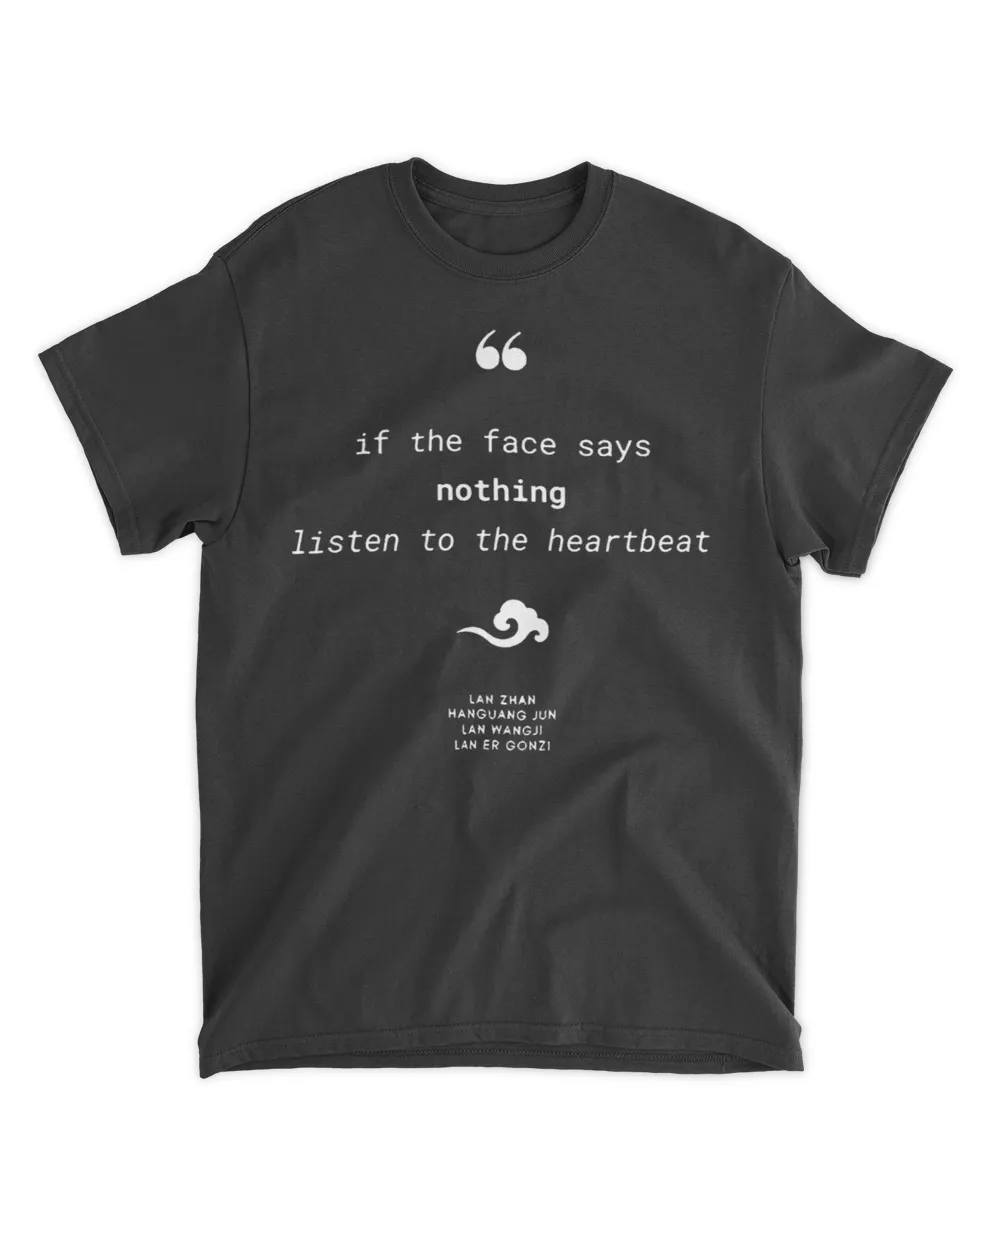  If the face says nothing listen to heartbeat shirt